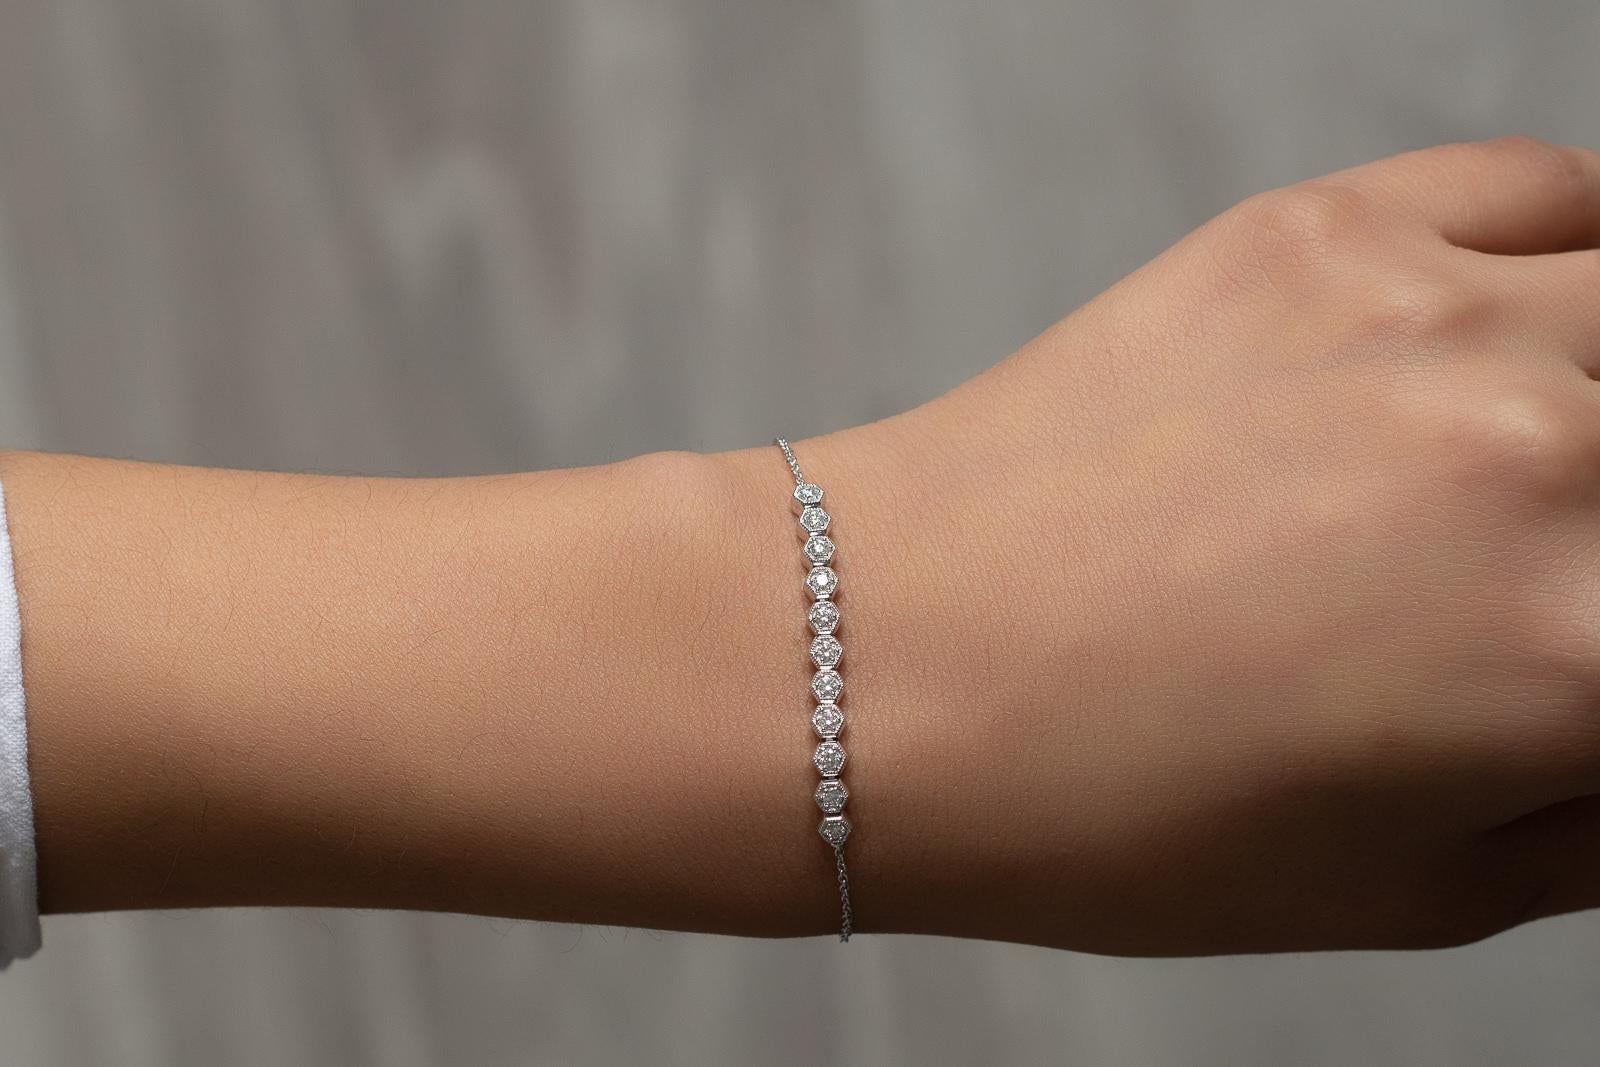 In trend with dainty and minimalistic jewelry, this romantic piece is the perfect stackable bracelet yet it's chic enough to wear as a standout. Layer your style with this 14k white gold bracelet featuring a honeycomb motif made of full cut